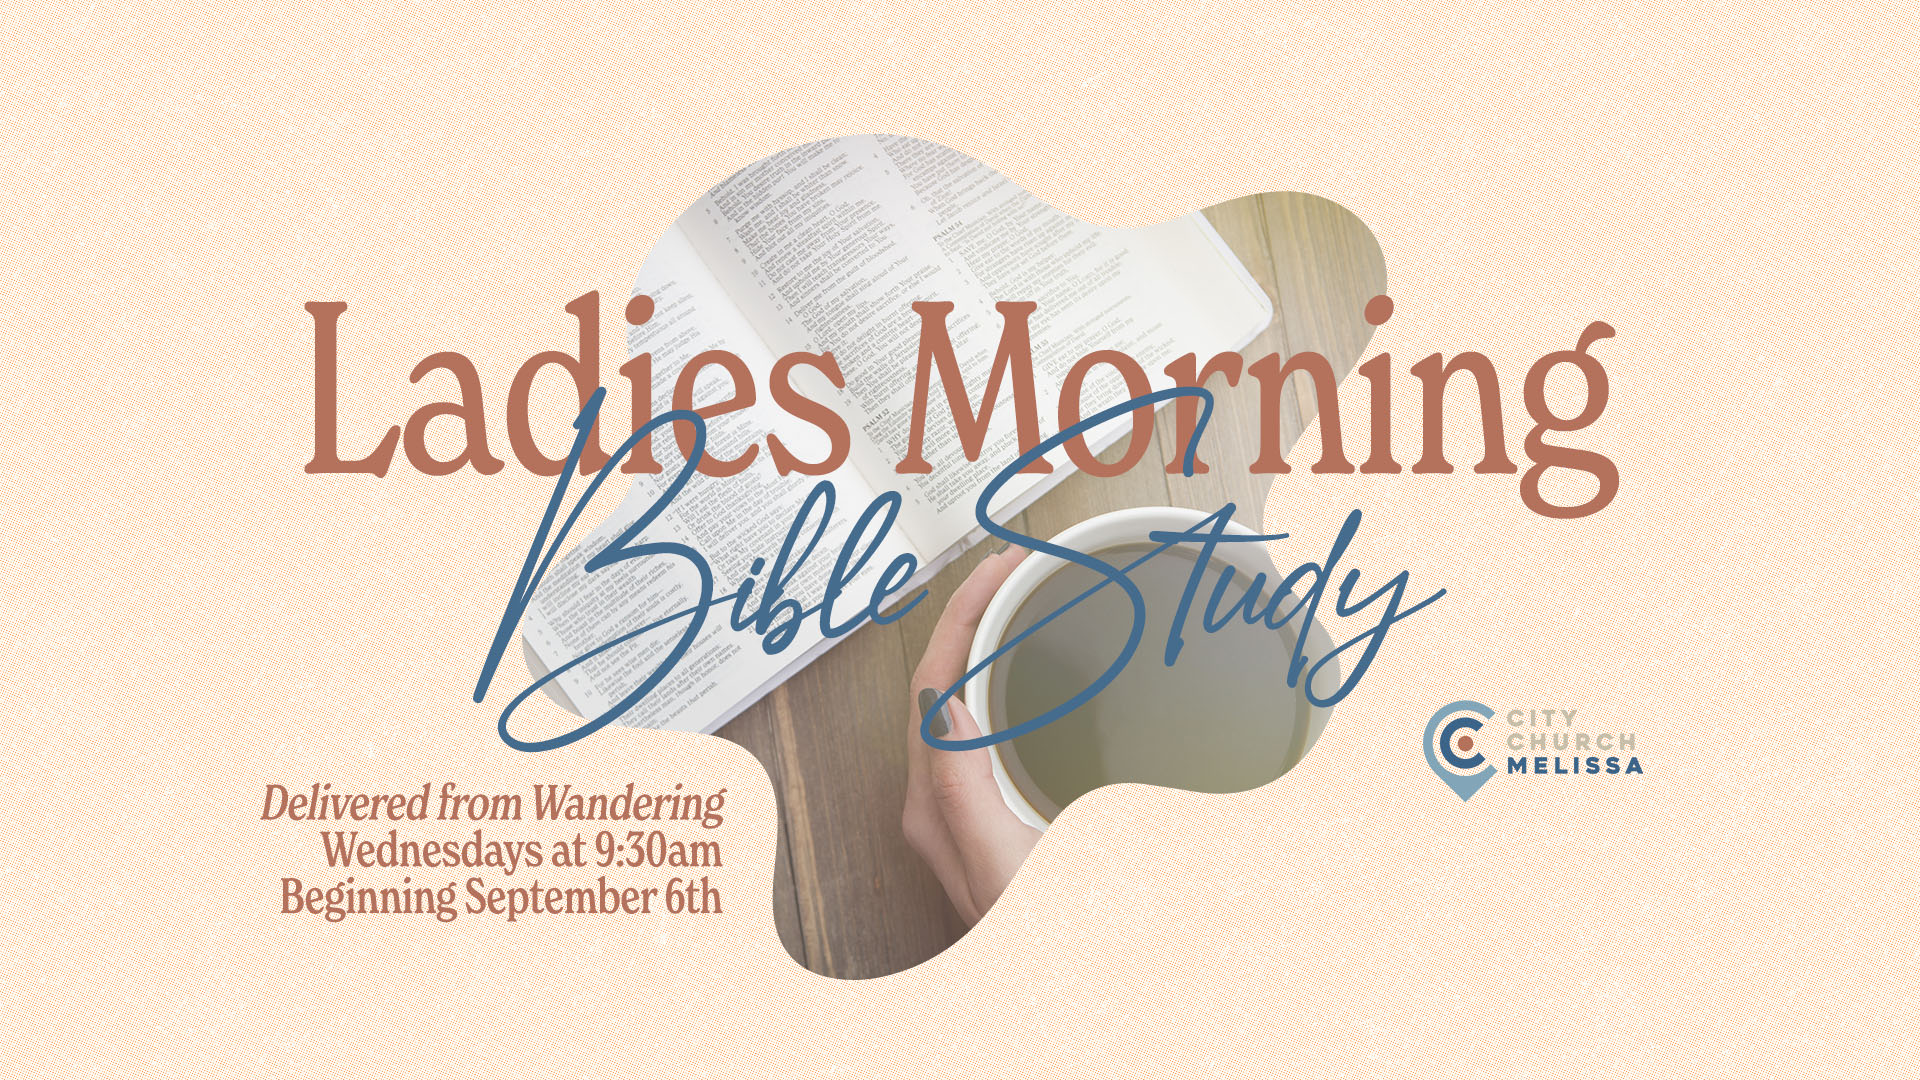 Ladies, our morning Bible Study returns for the Fall semester on Wednesday, September 6th, from 9:30-11:00a! We will be studying Psalm 119 together.

Childcare will be provided for children 6 and under, please <a href="https://citychurchmelissa.churchcenter.com/registrations/events/1886357">REGISTER HERE.</a>